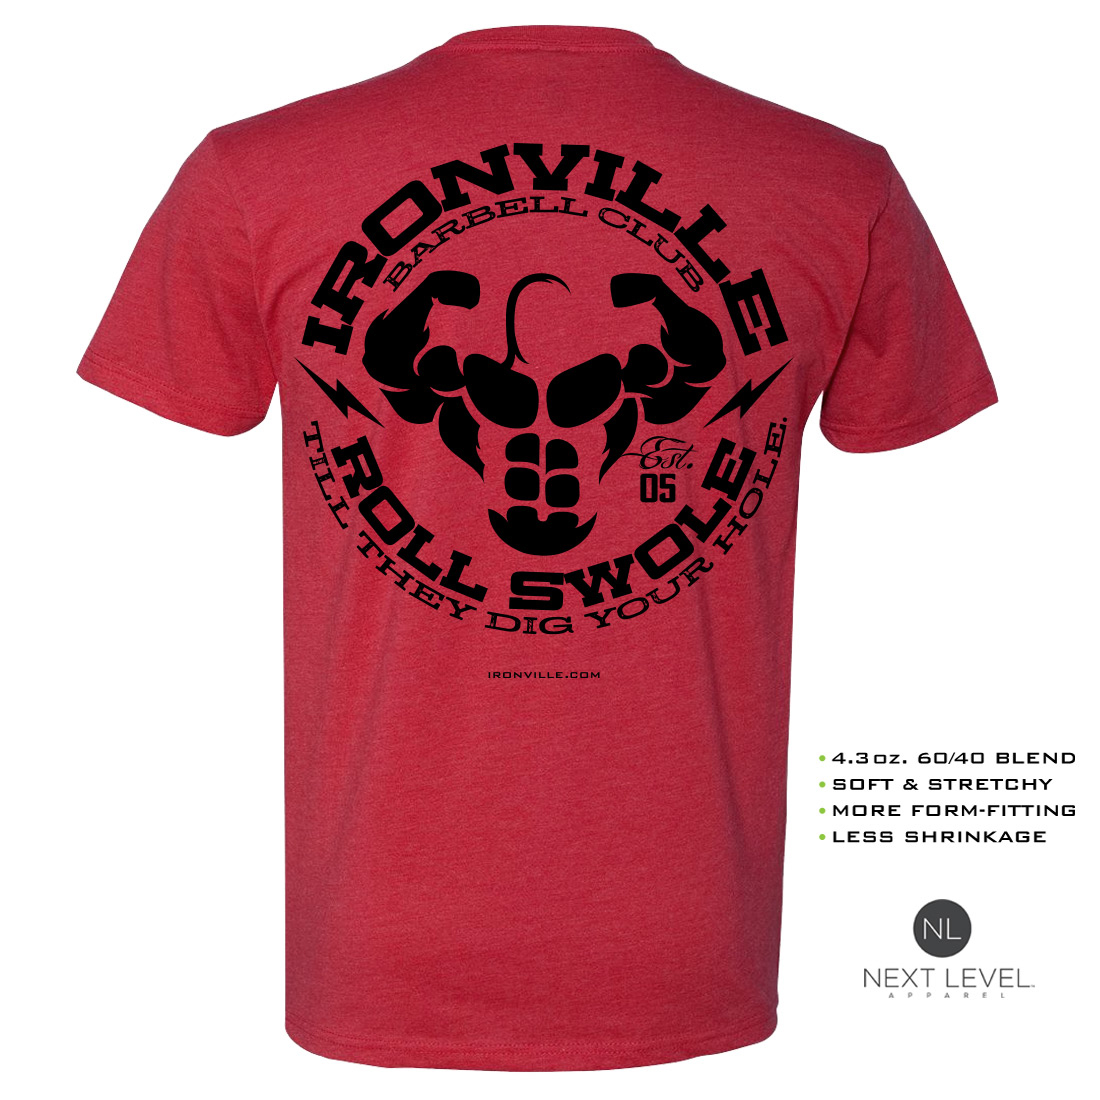 T-Shirt Soft Ironville Swole Fitted They Club Your Hole Dig Roll Blend Barbell Till